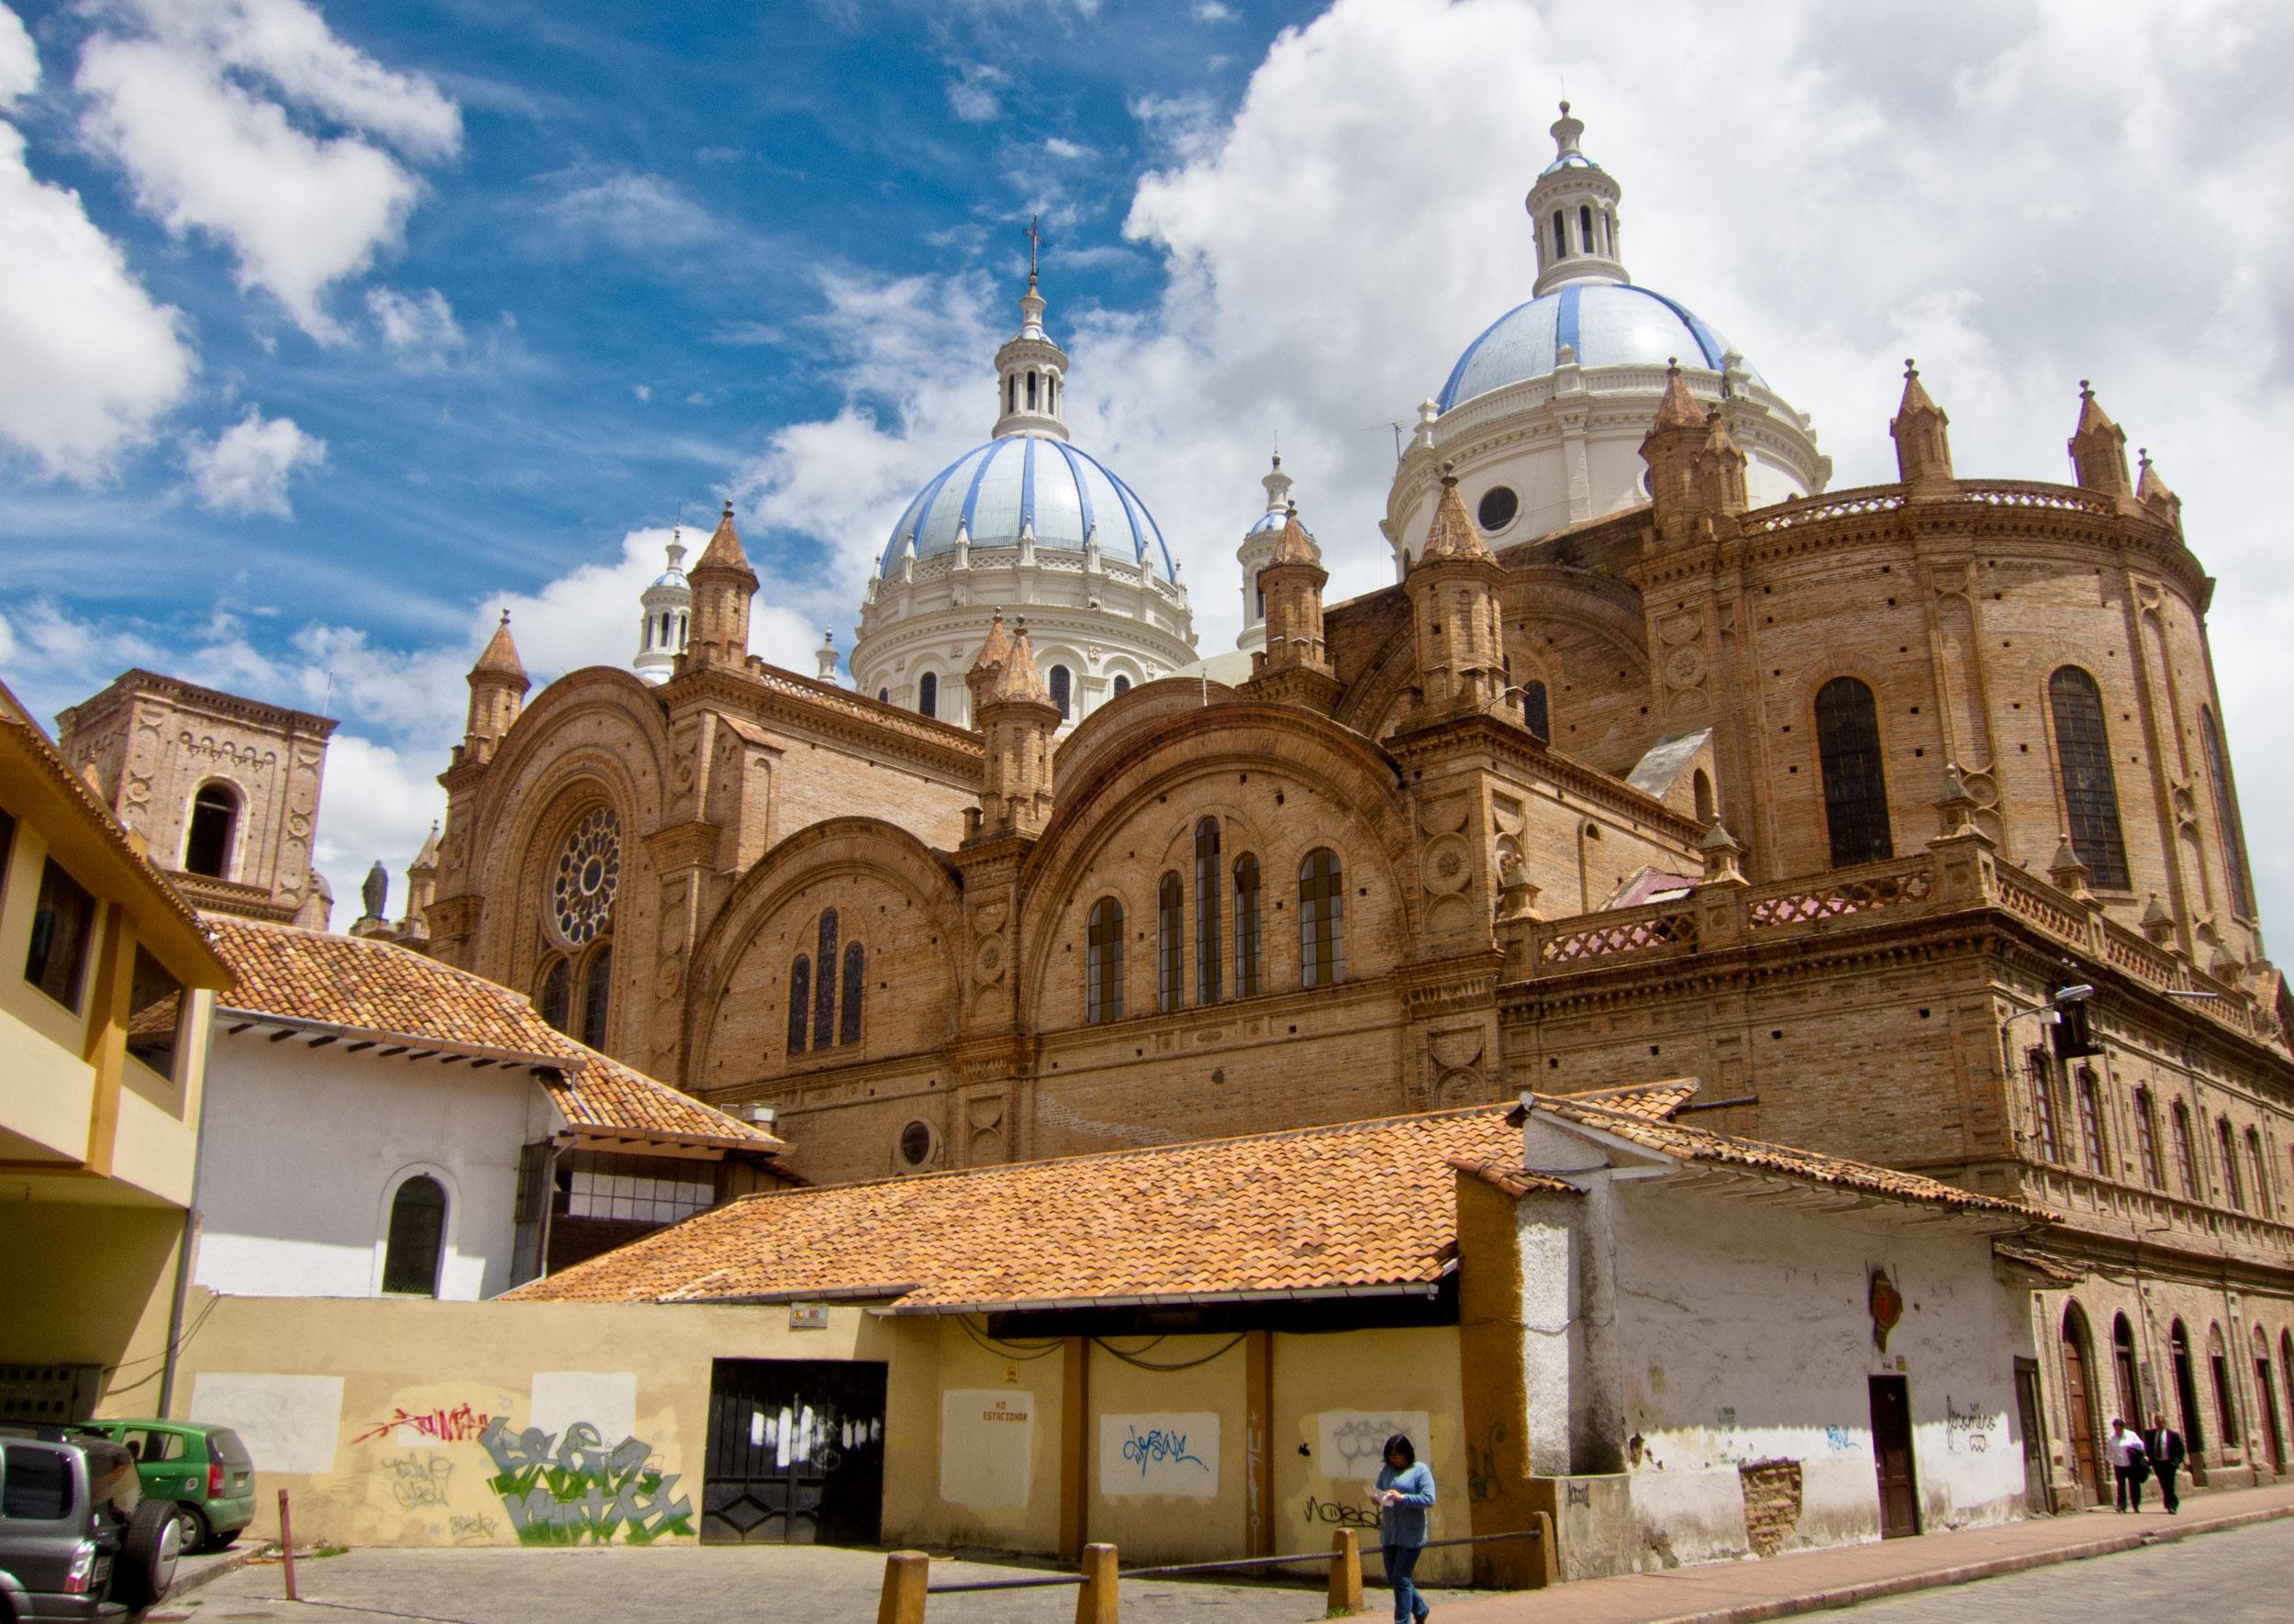 One of the top things to do in Cuenca is visit the Cathedral